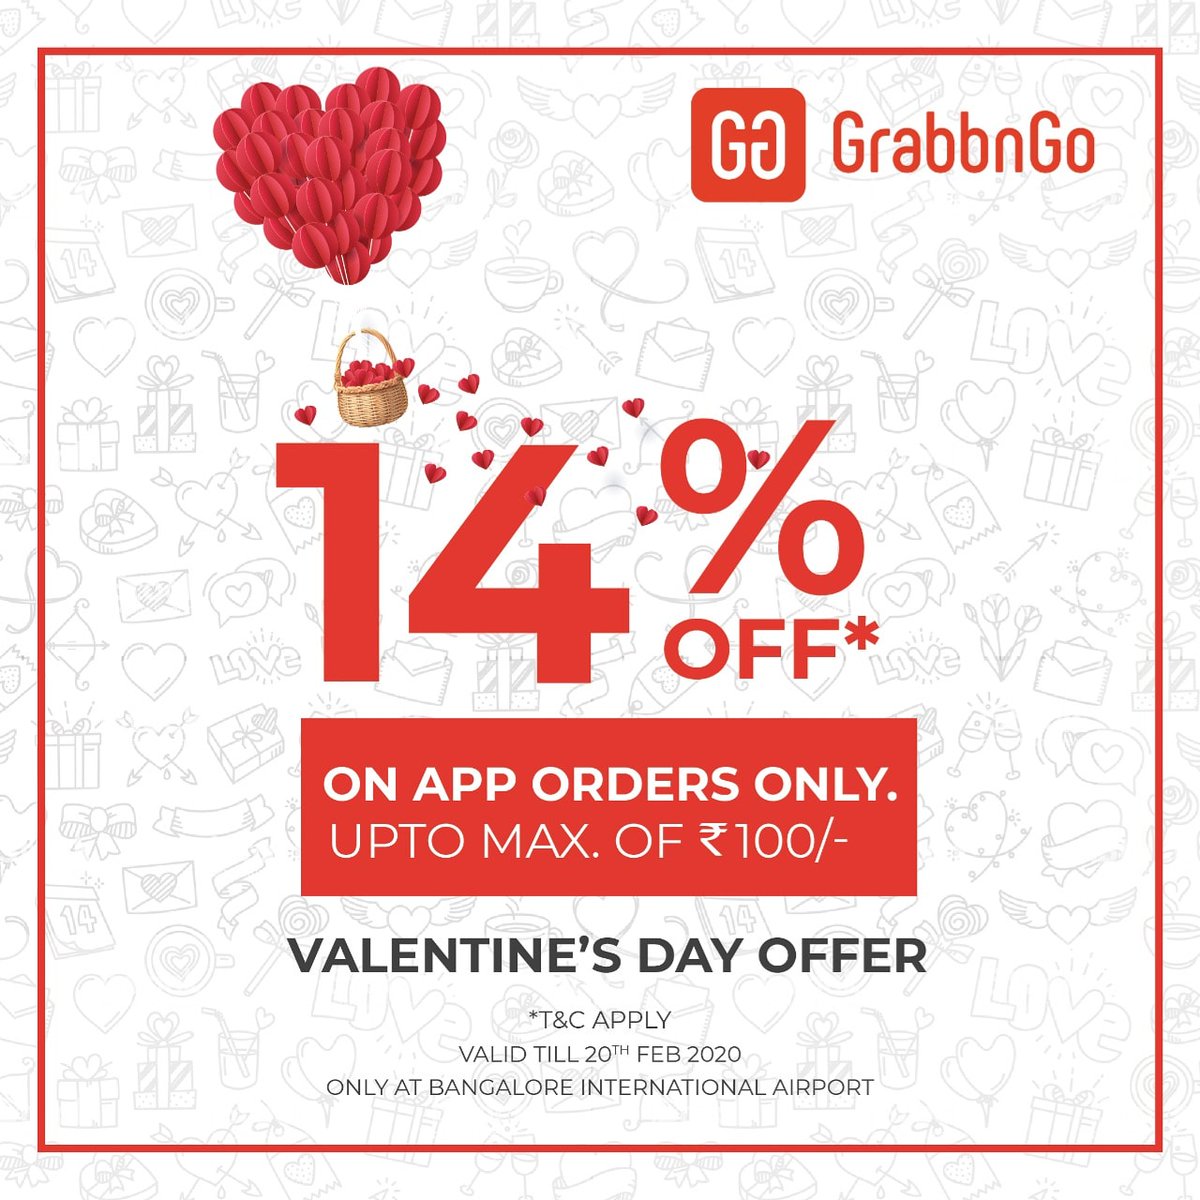 If you're flying to anywhere from Bangalore, between 14th to 20th February, avail the sweet Valentine's discount.

#discount #valentine's #valentines #valentinesdiscount #GrabbnGo #NeverFlyHungry